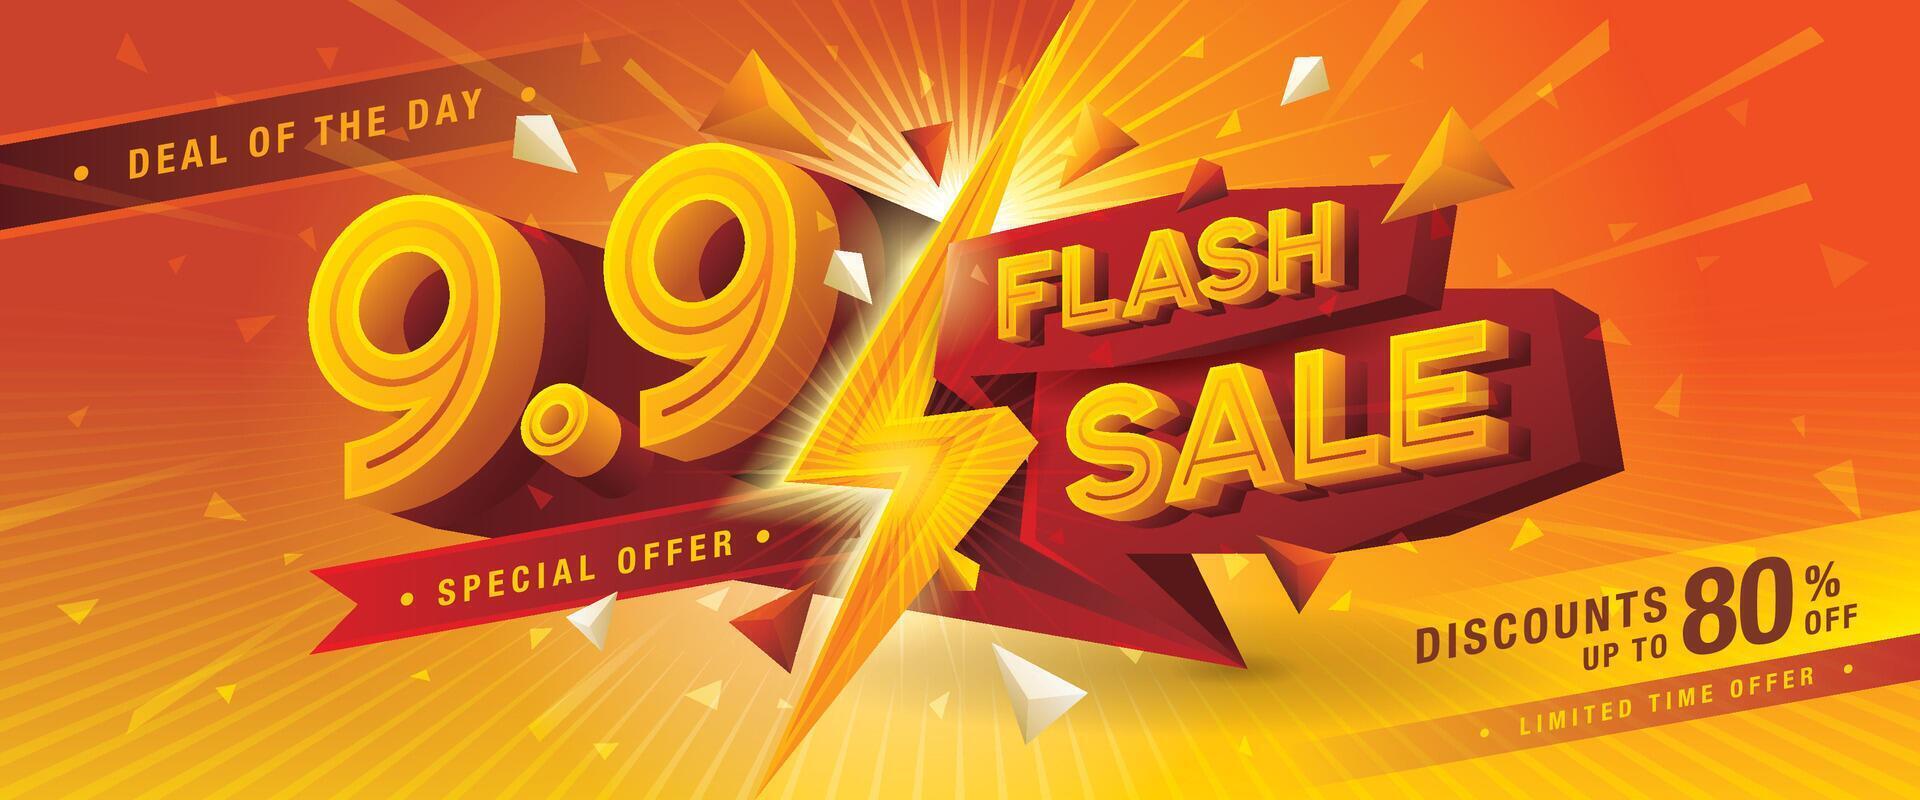 9.9 Shopping Day Flash Sale Banner Template design special offer discount. vector